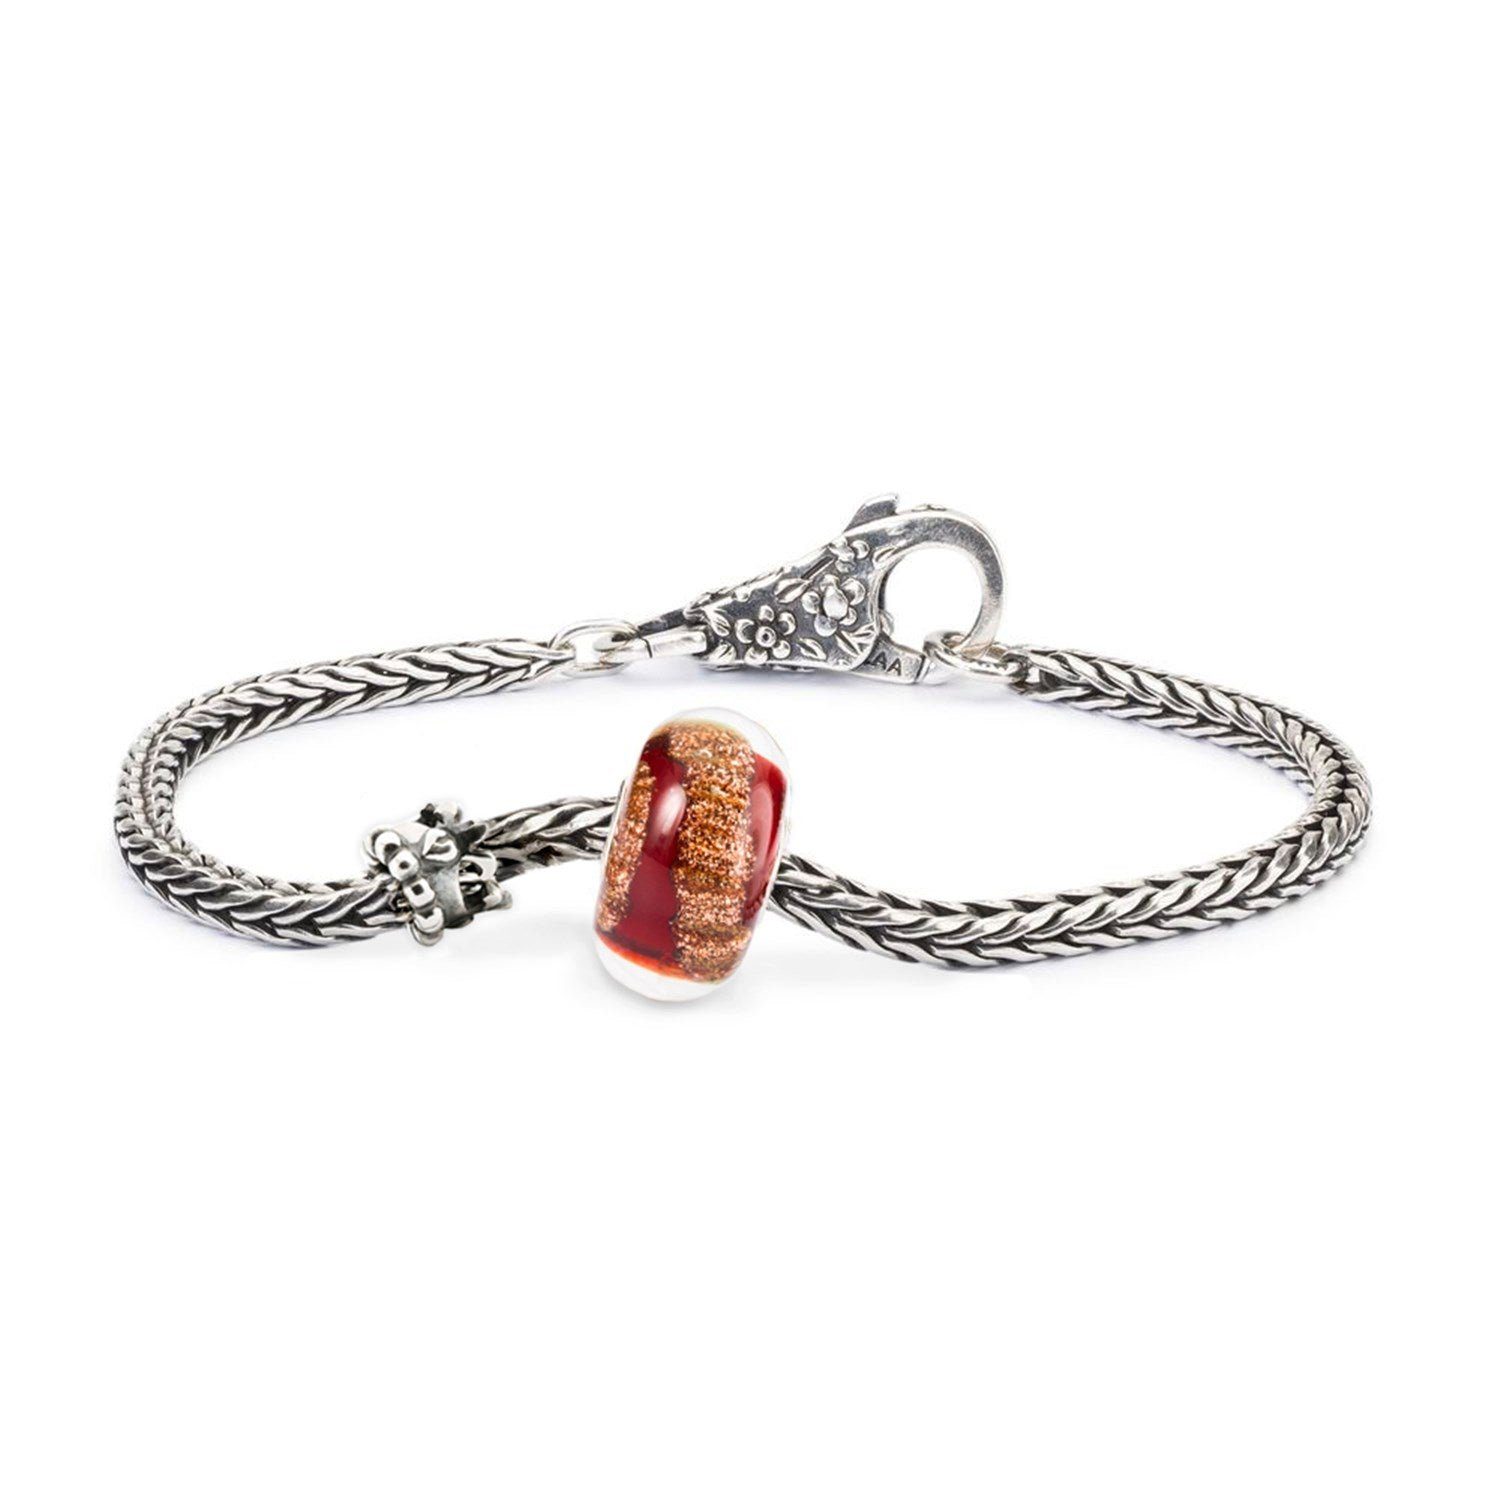 Royal Red Edition, TZZDE-00926 Limitierte Trollbeads - Charm-Armband Armband